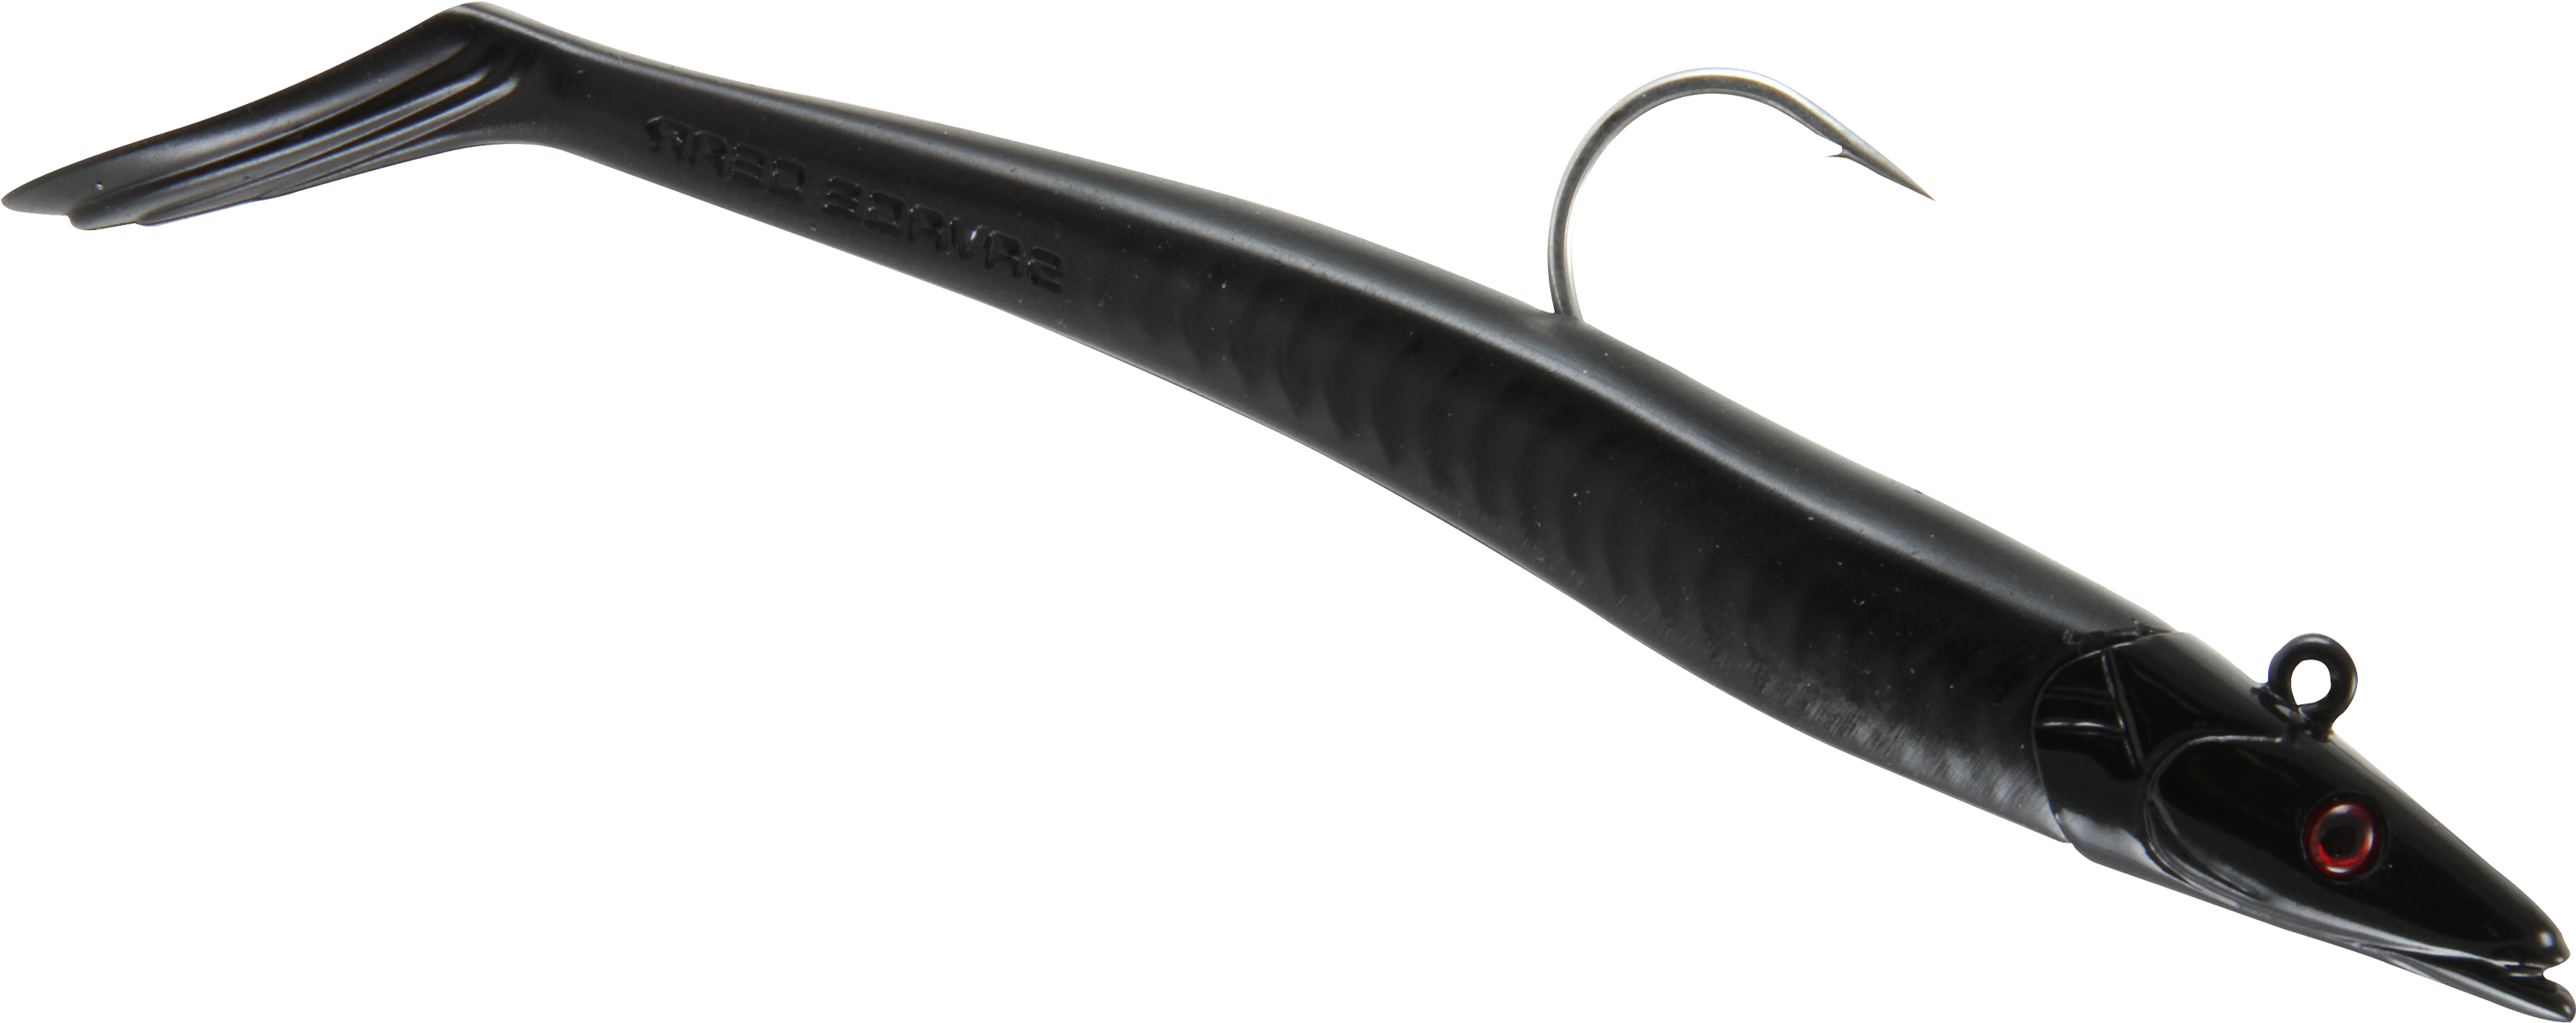 A Black Knife With A Handle